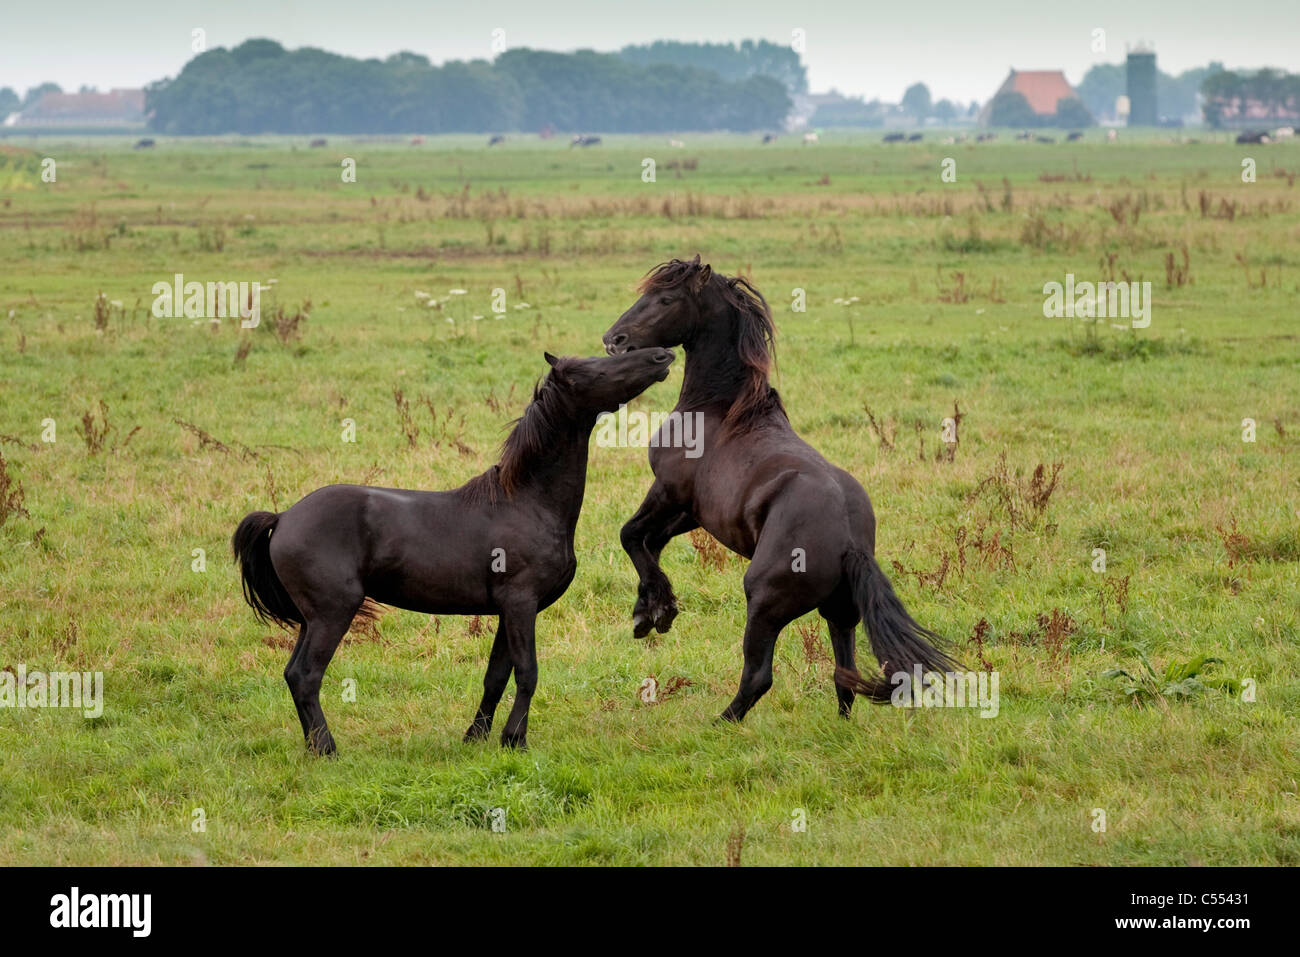 The Netherlands, Woudsend, Young Friesian horses. Stock Photo